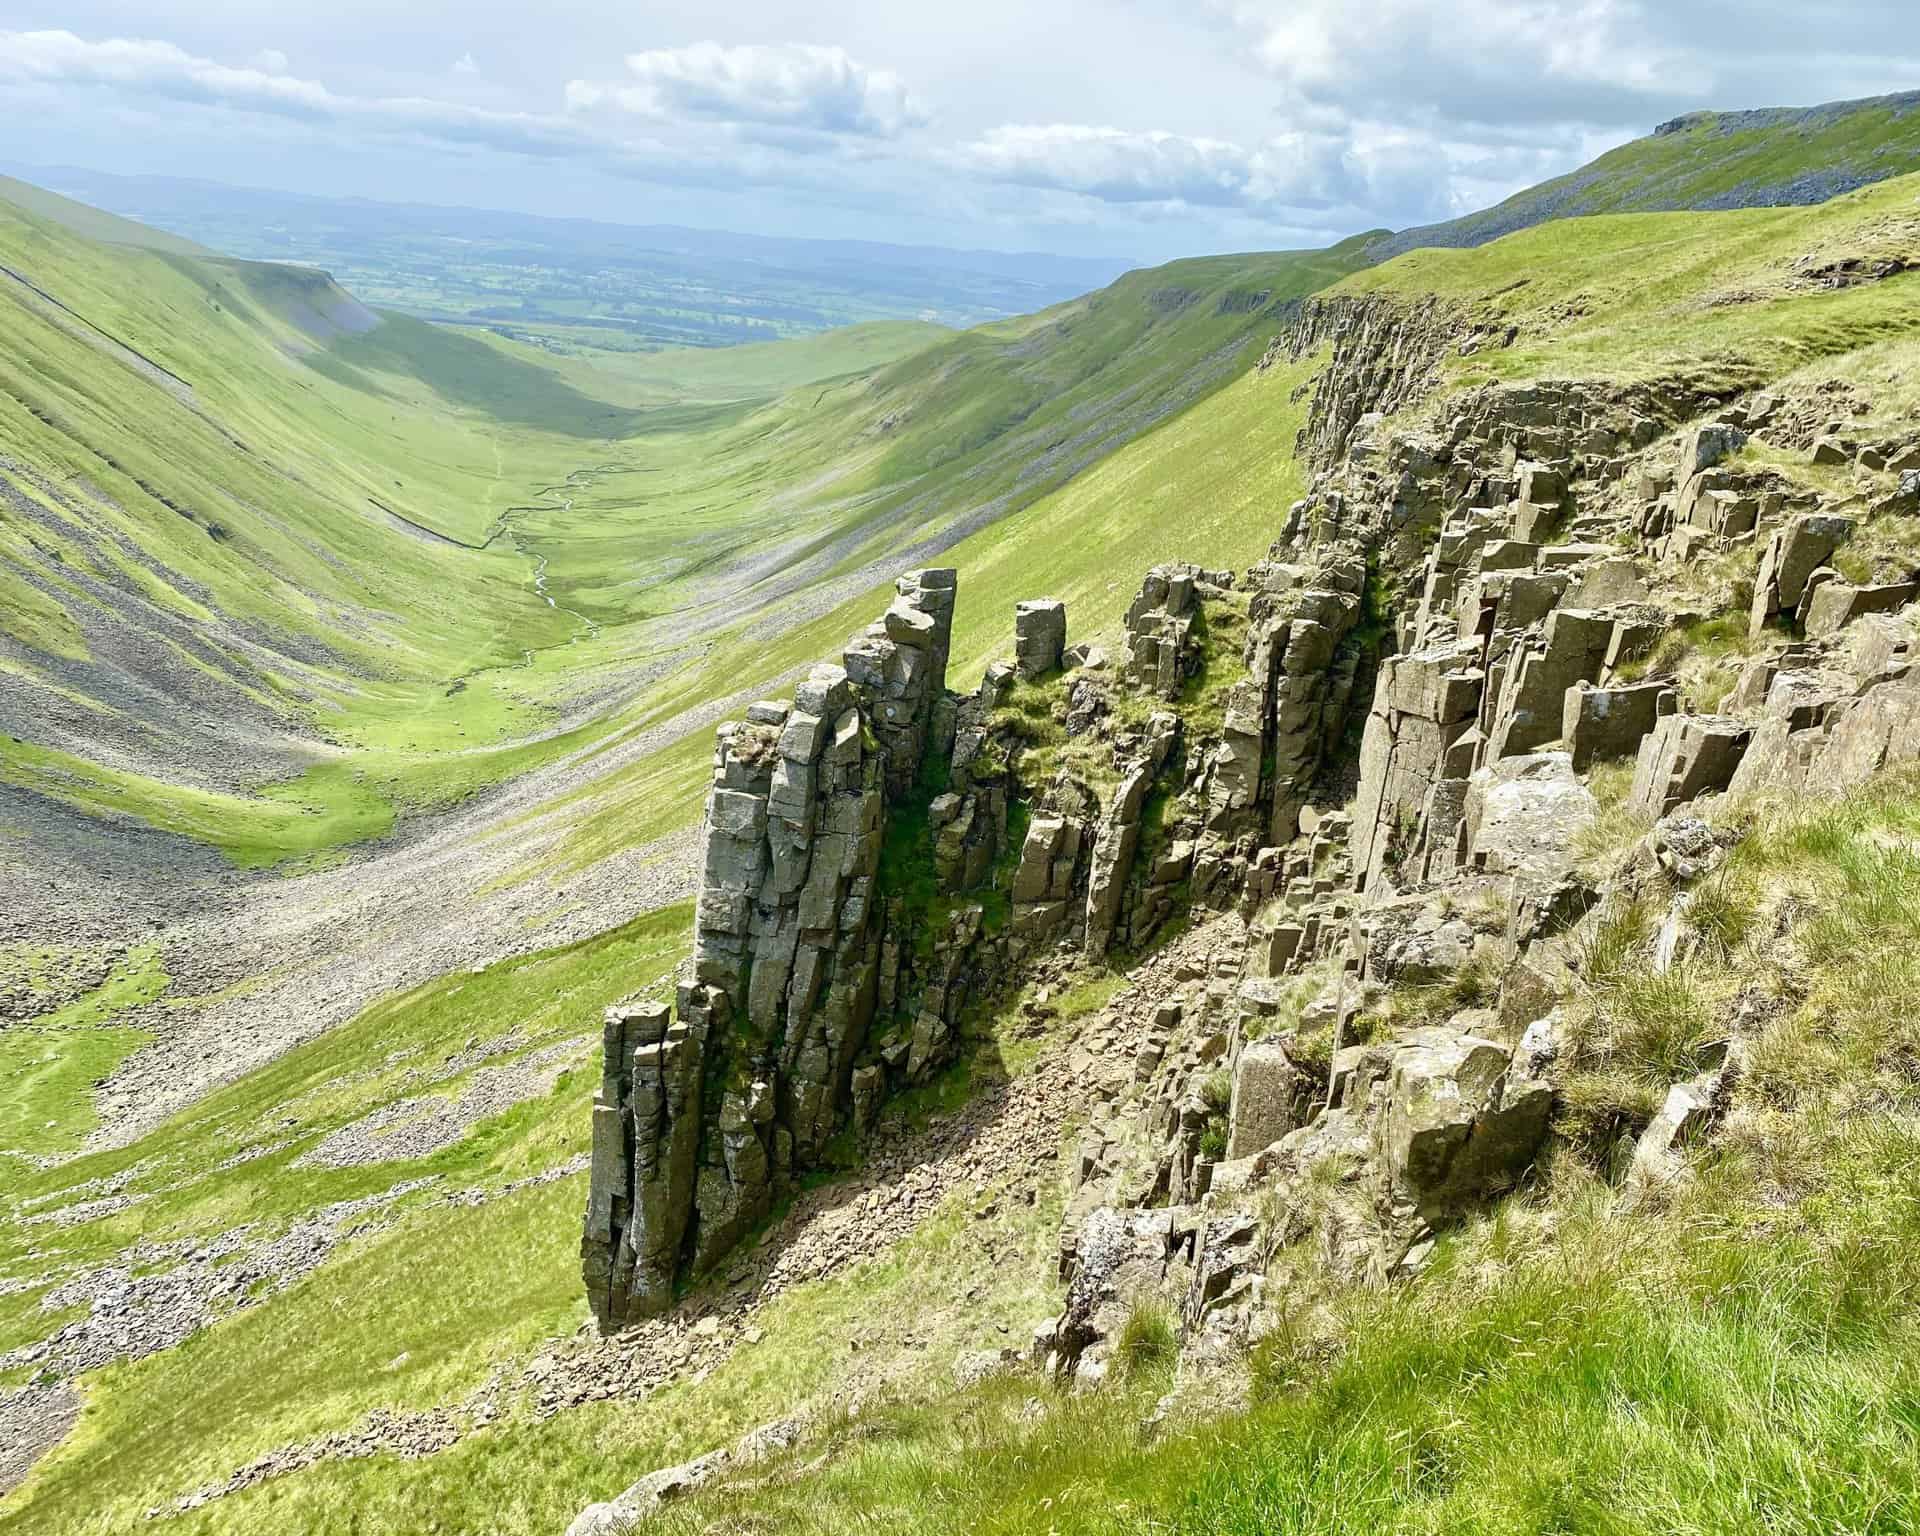 The northern side of the valley near the head is known as Nichol Chair after a local cobbler who, for a bet, practised his craft perched on the rocks.